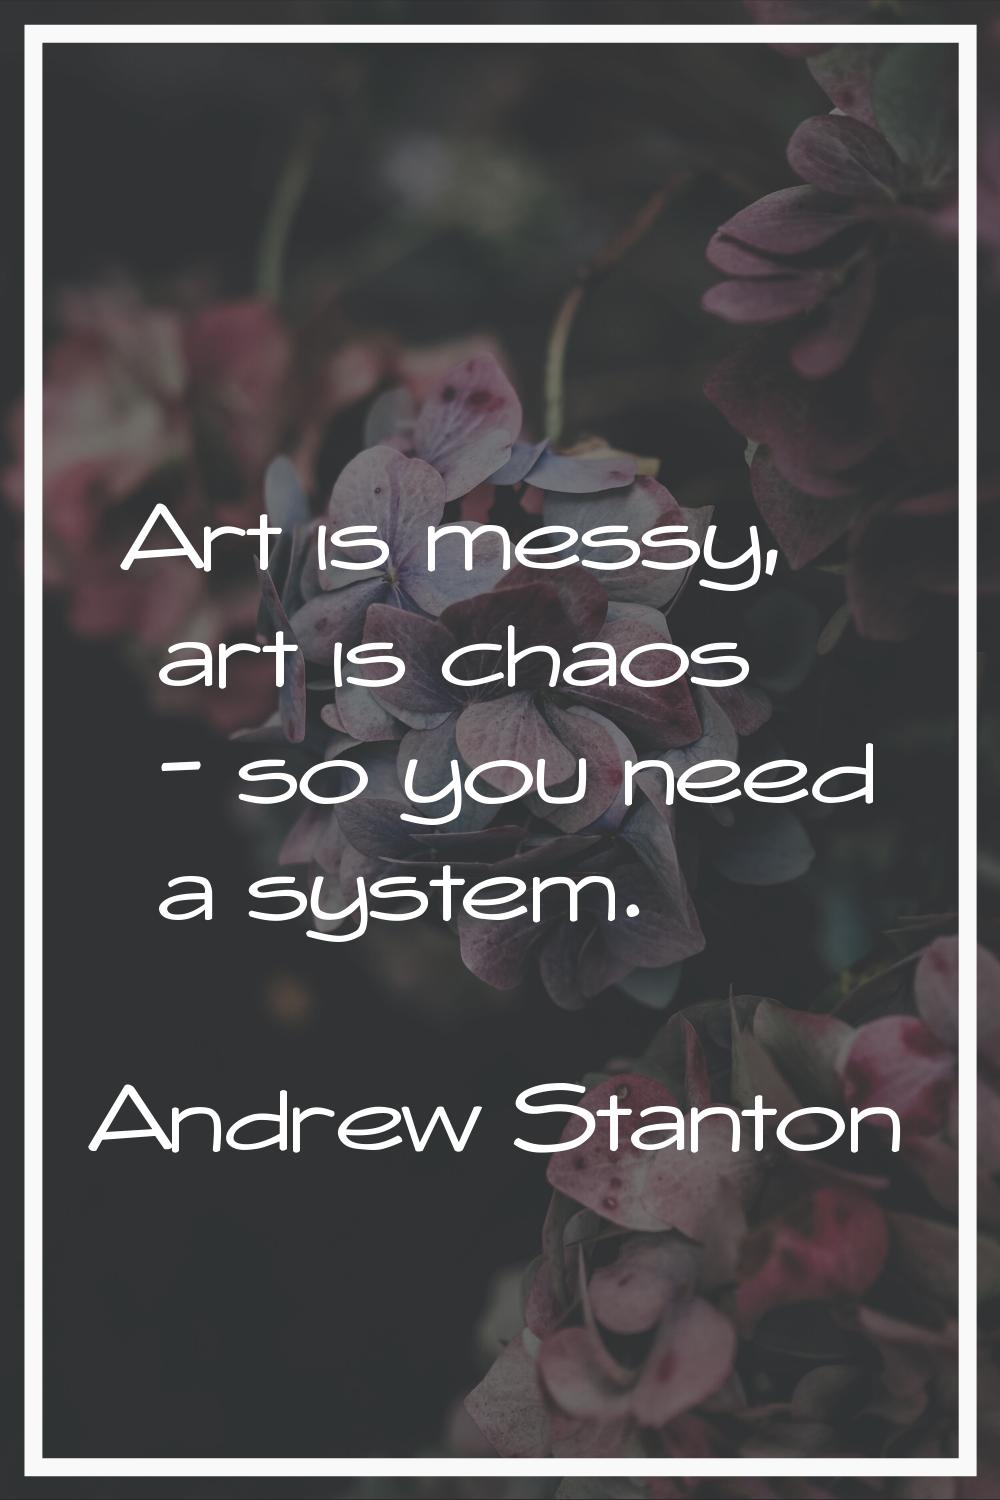 Art is messy, art is chaos - so you need a system.